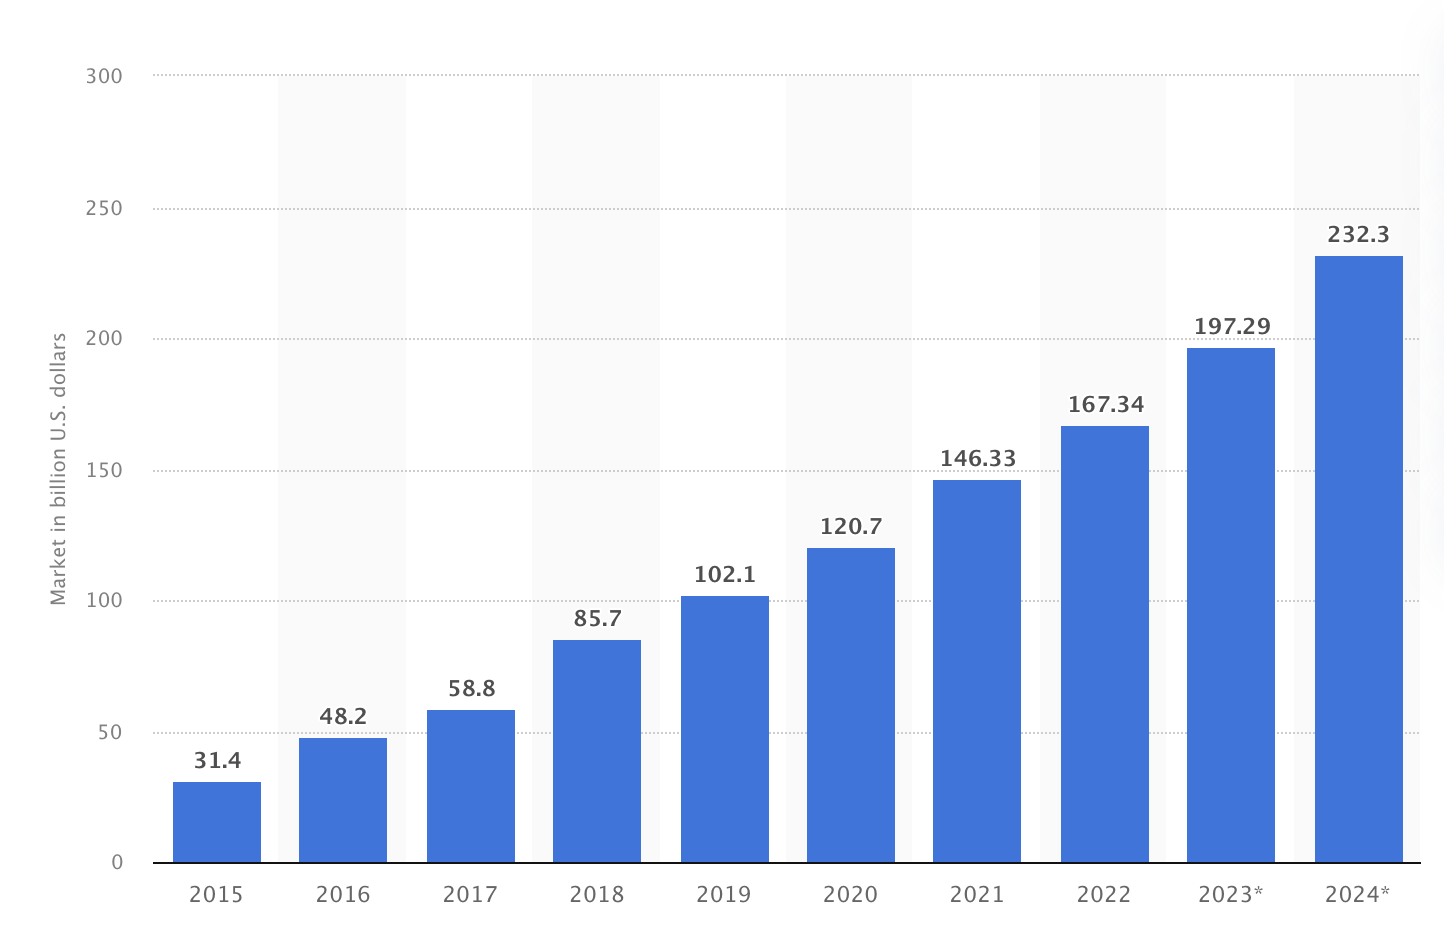 SaaS growth projections Statista